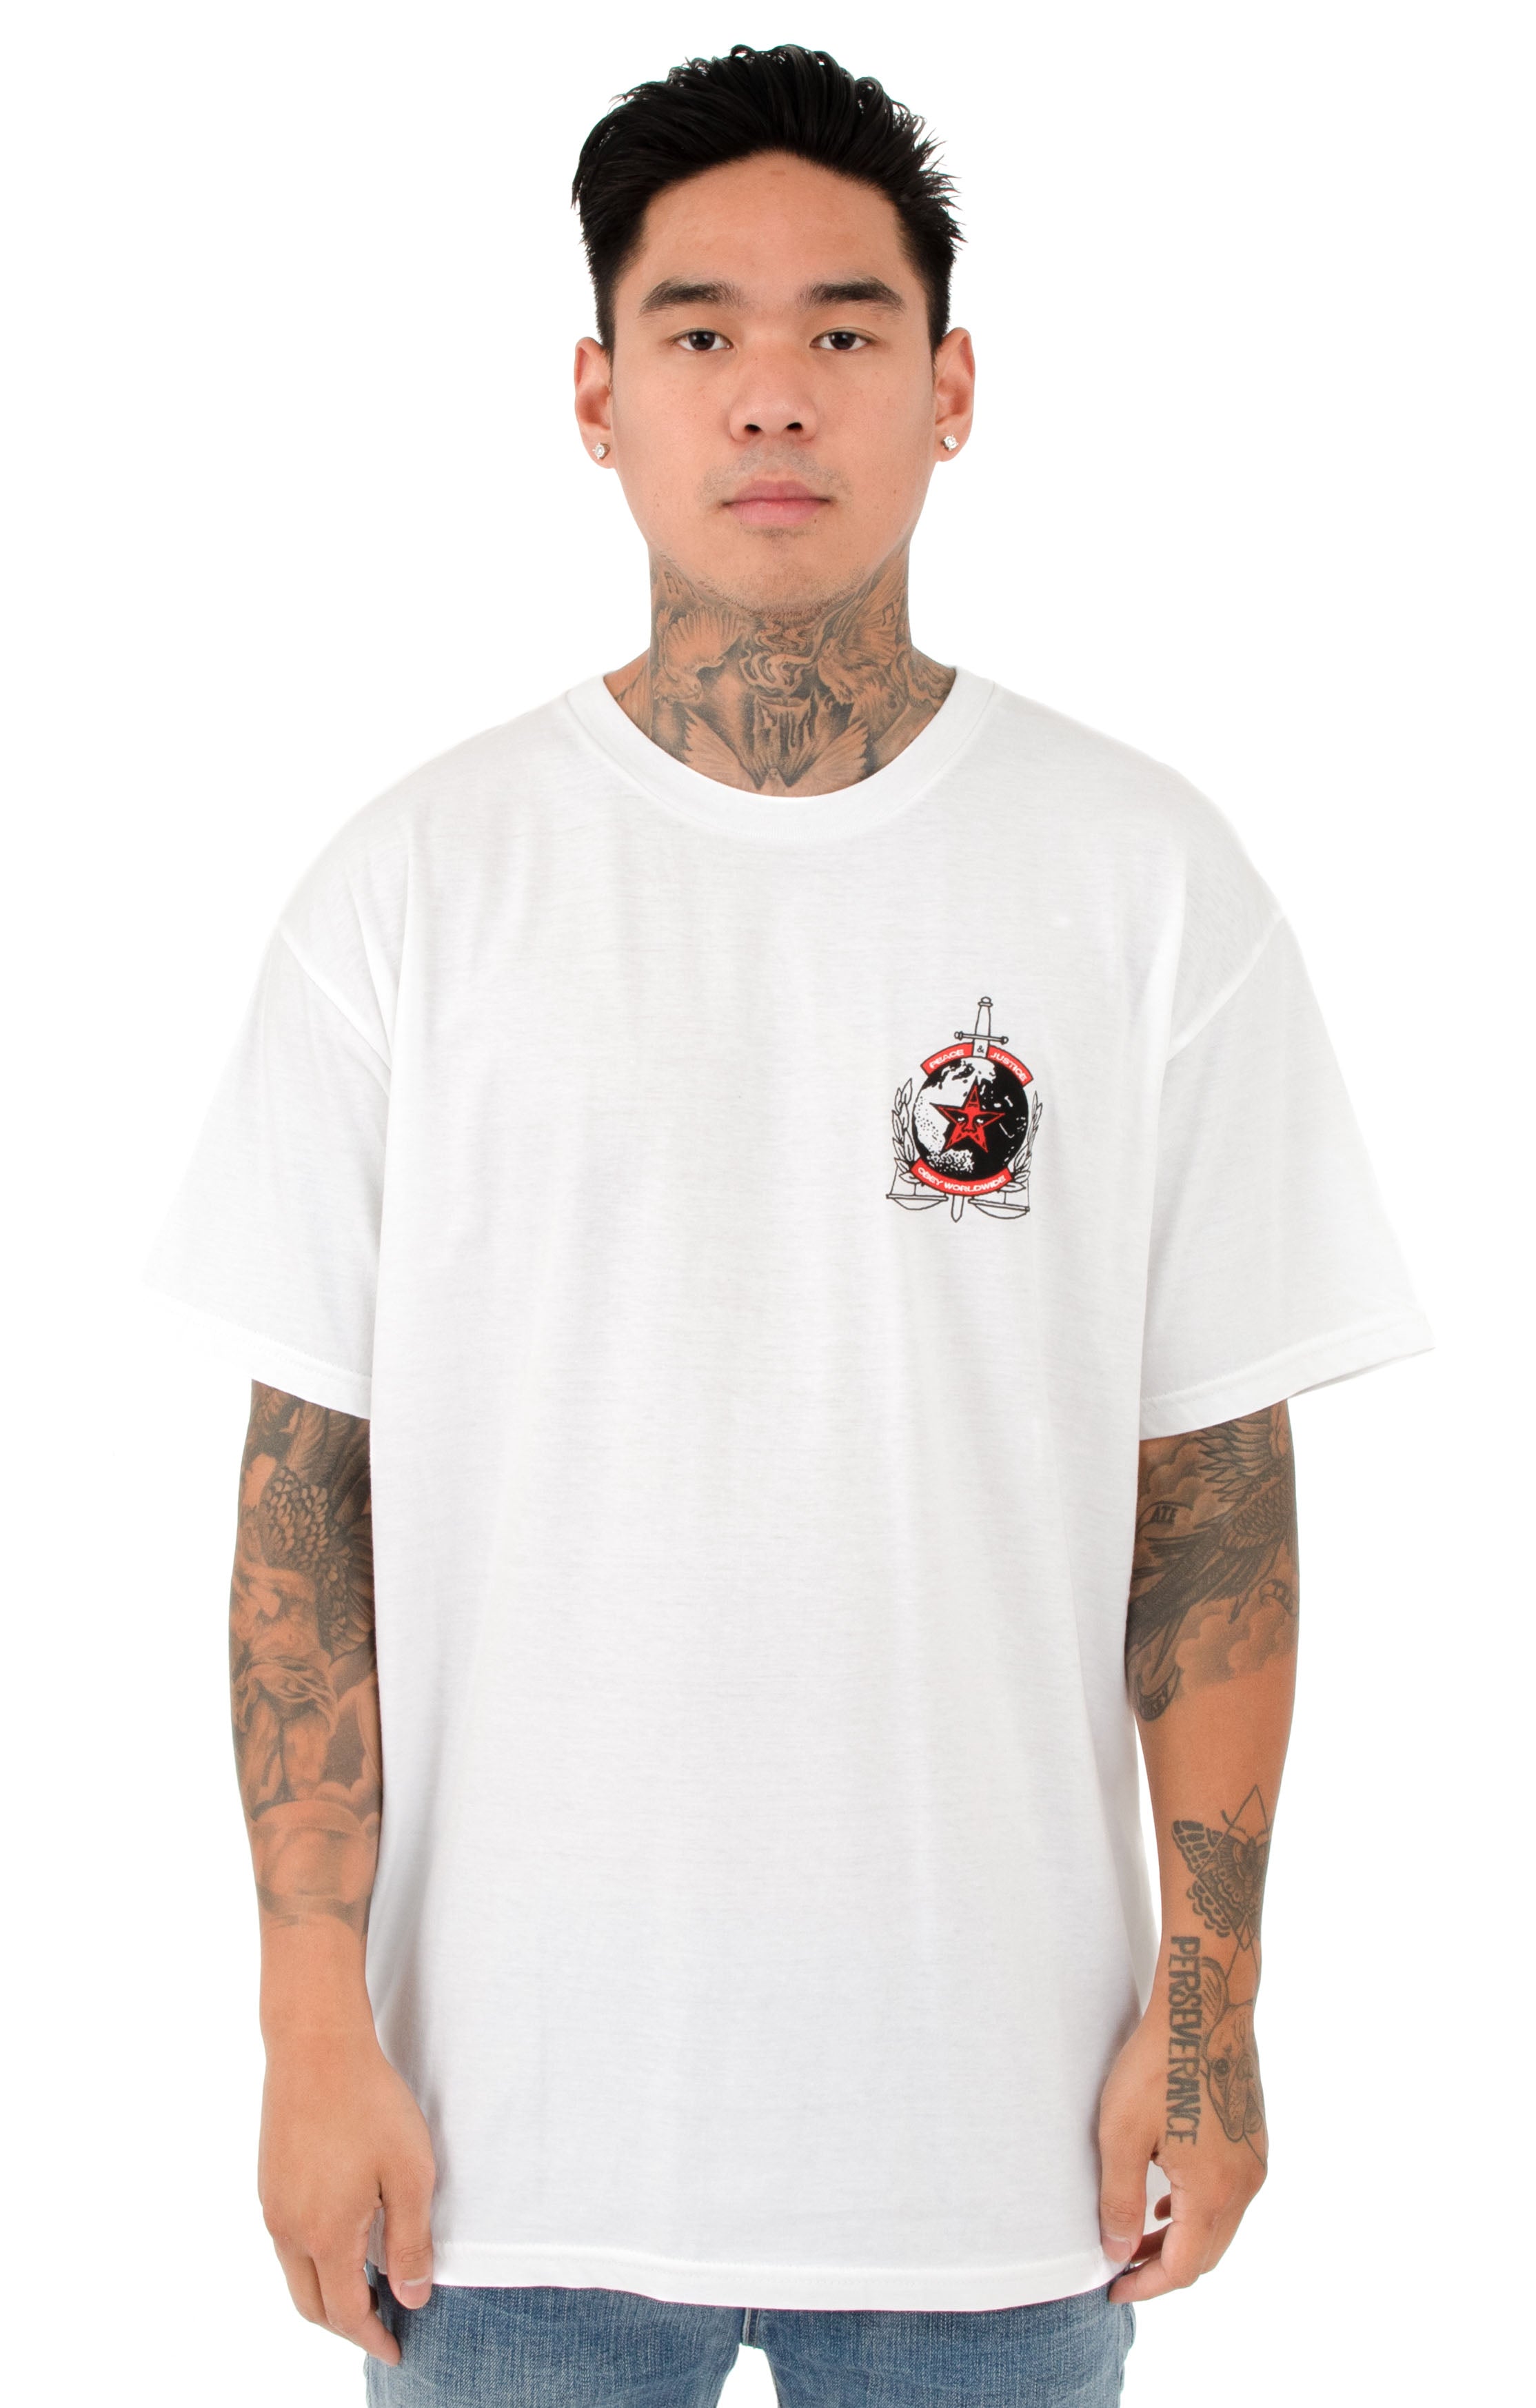 Obey Peace & Justice T-Shirt - White